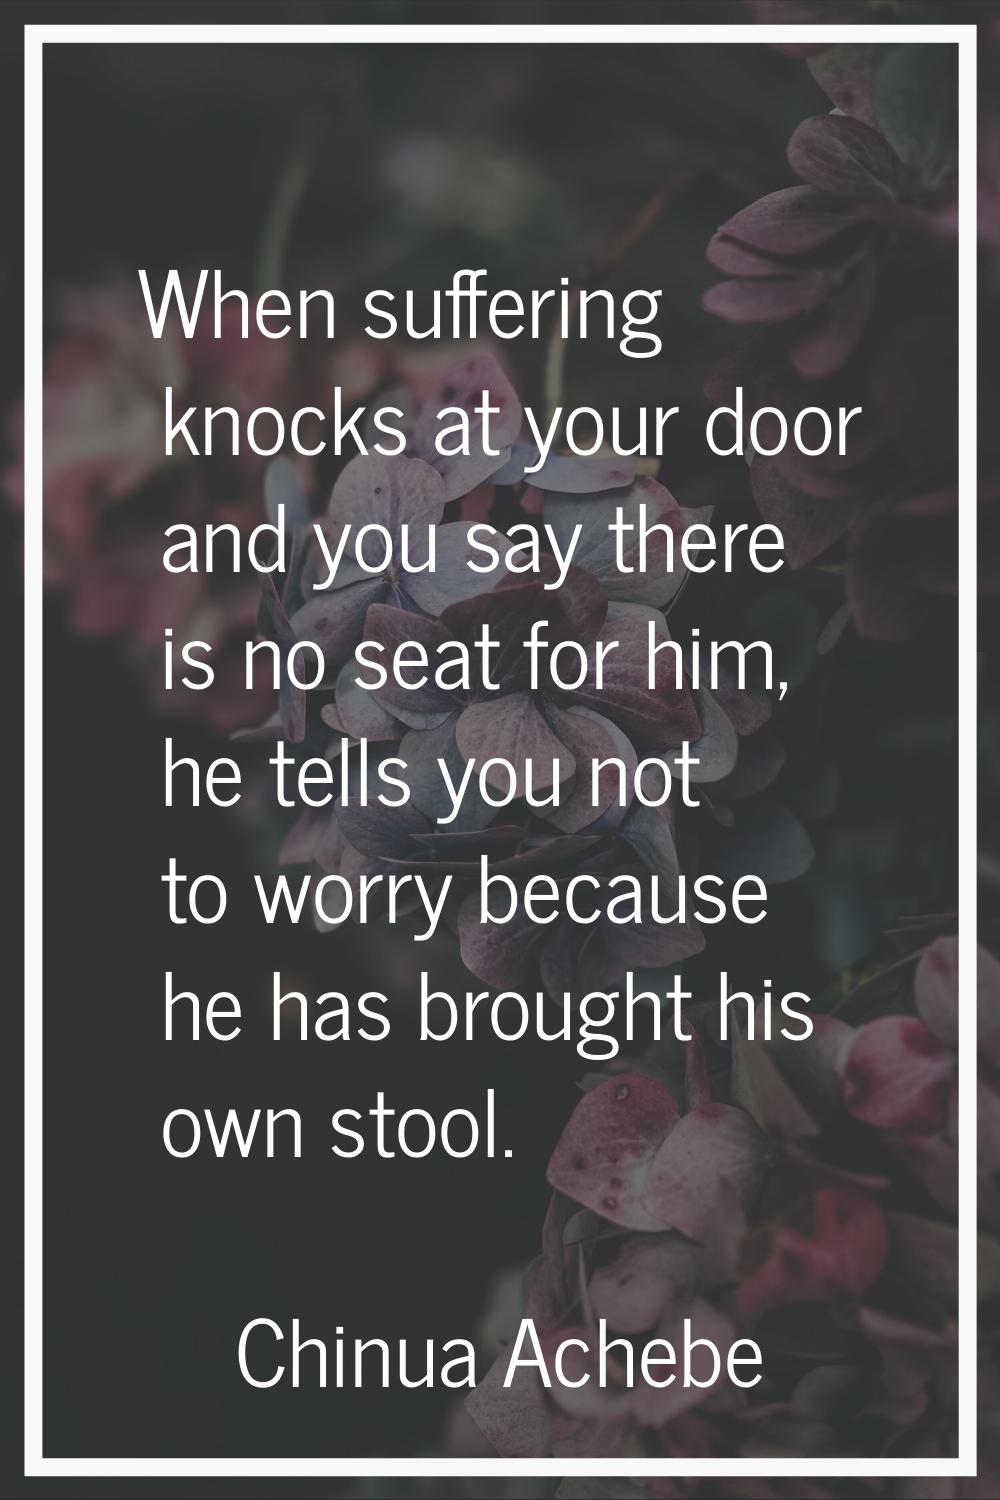 When suffering knocks at your door and you say there is no seat for him, he tells you not to worry 